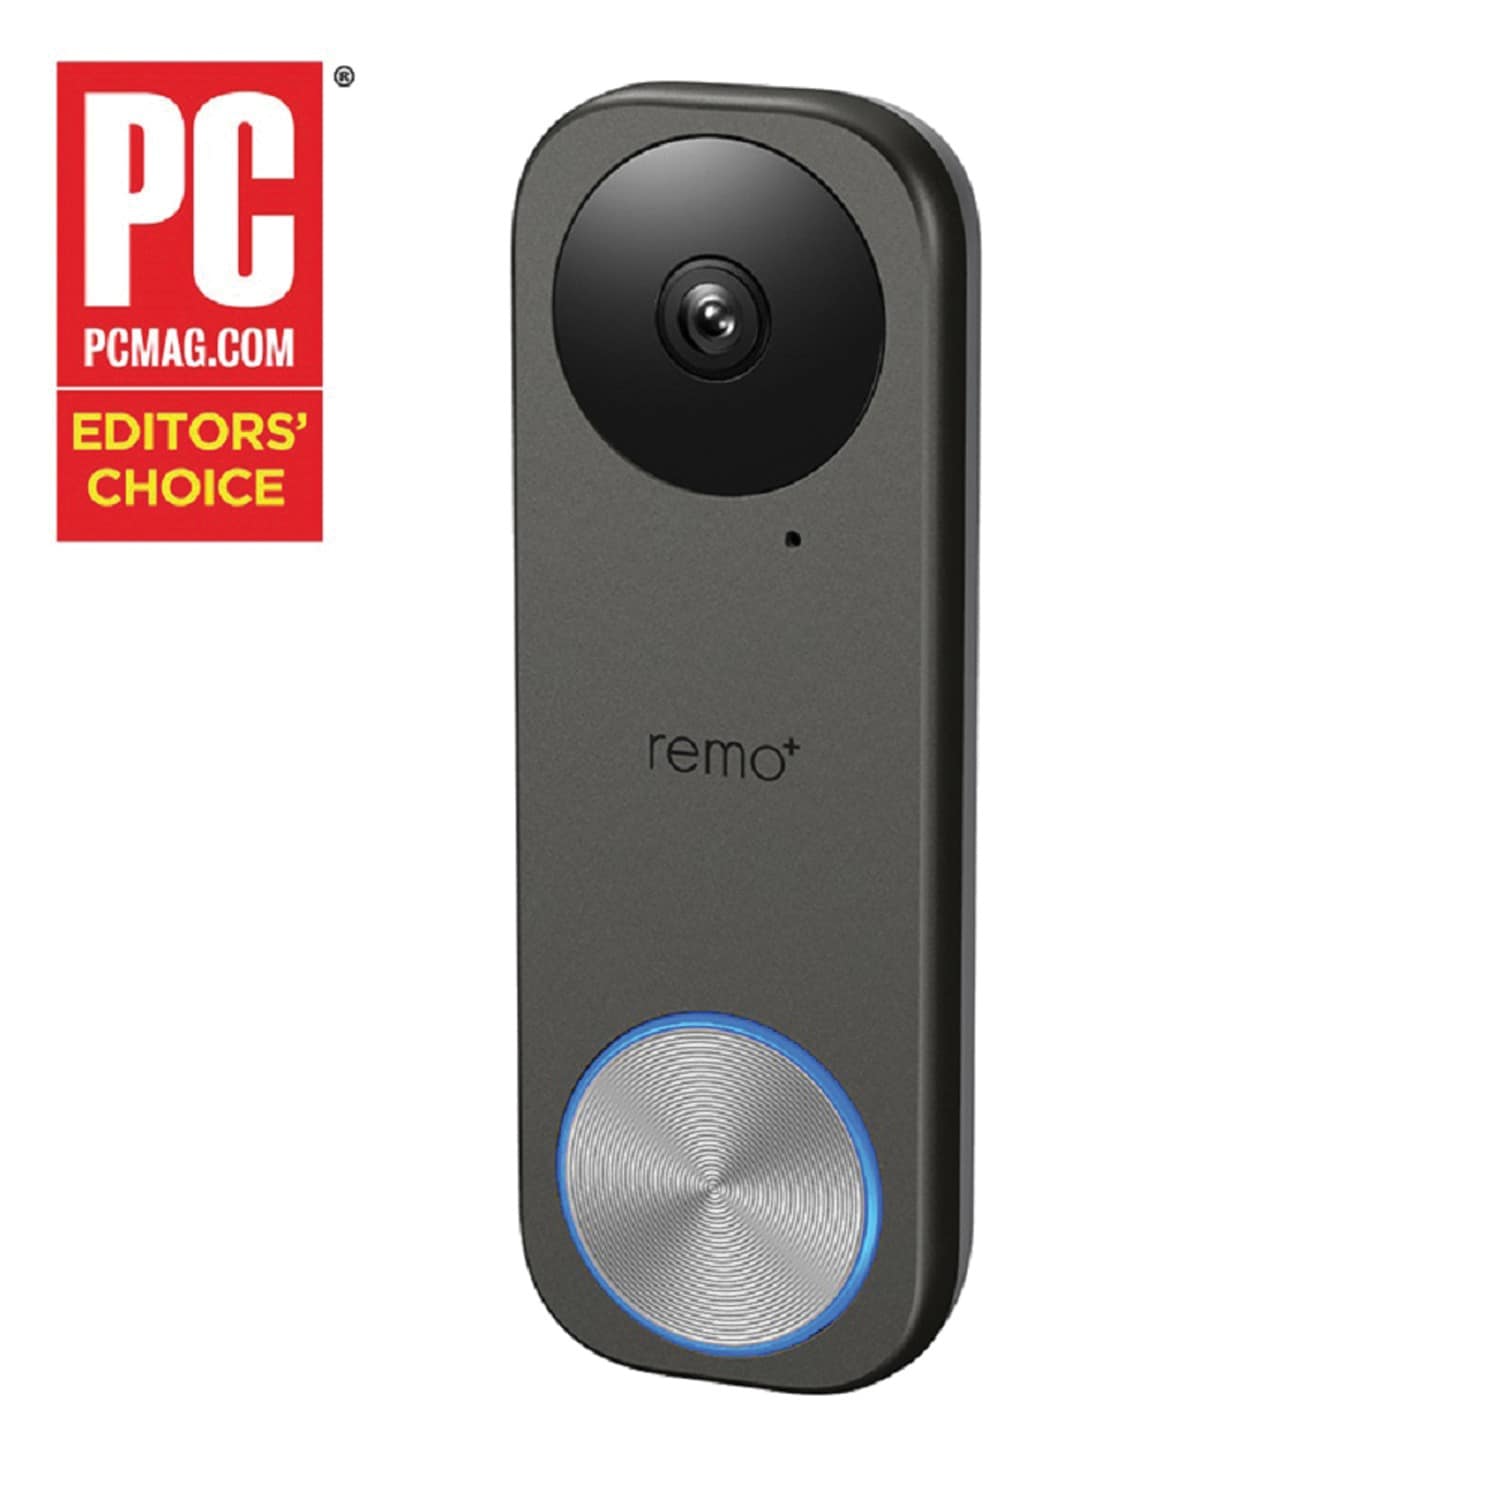 remo+ Wired Smart Video Doorbell in Gray